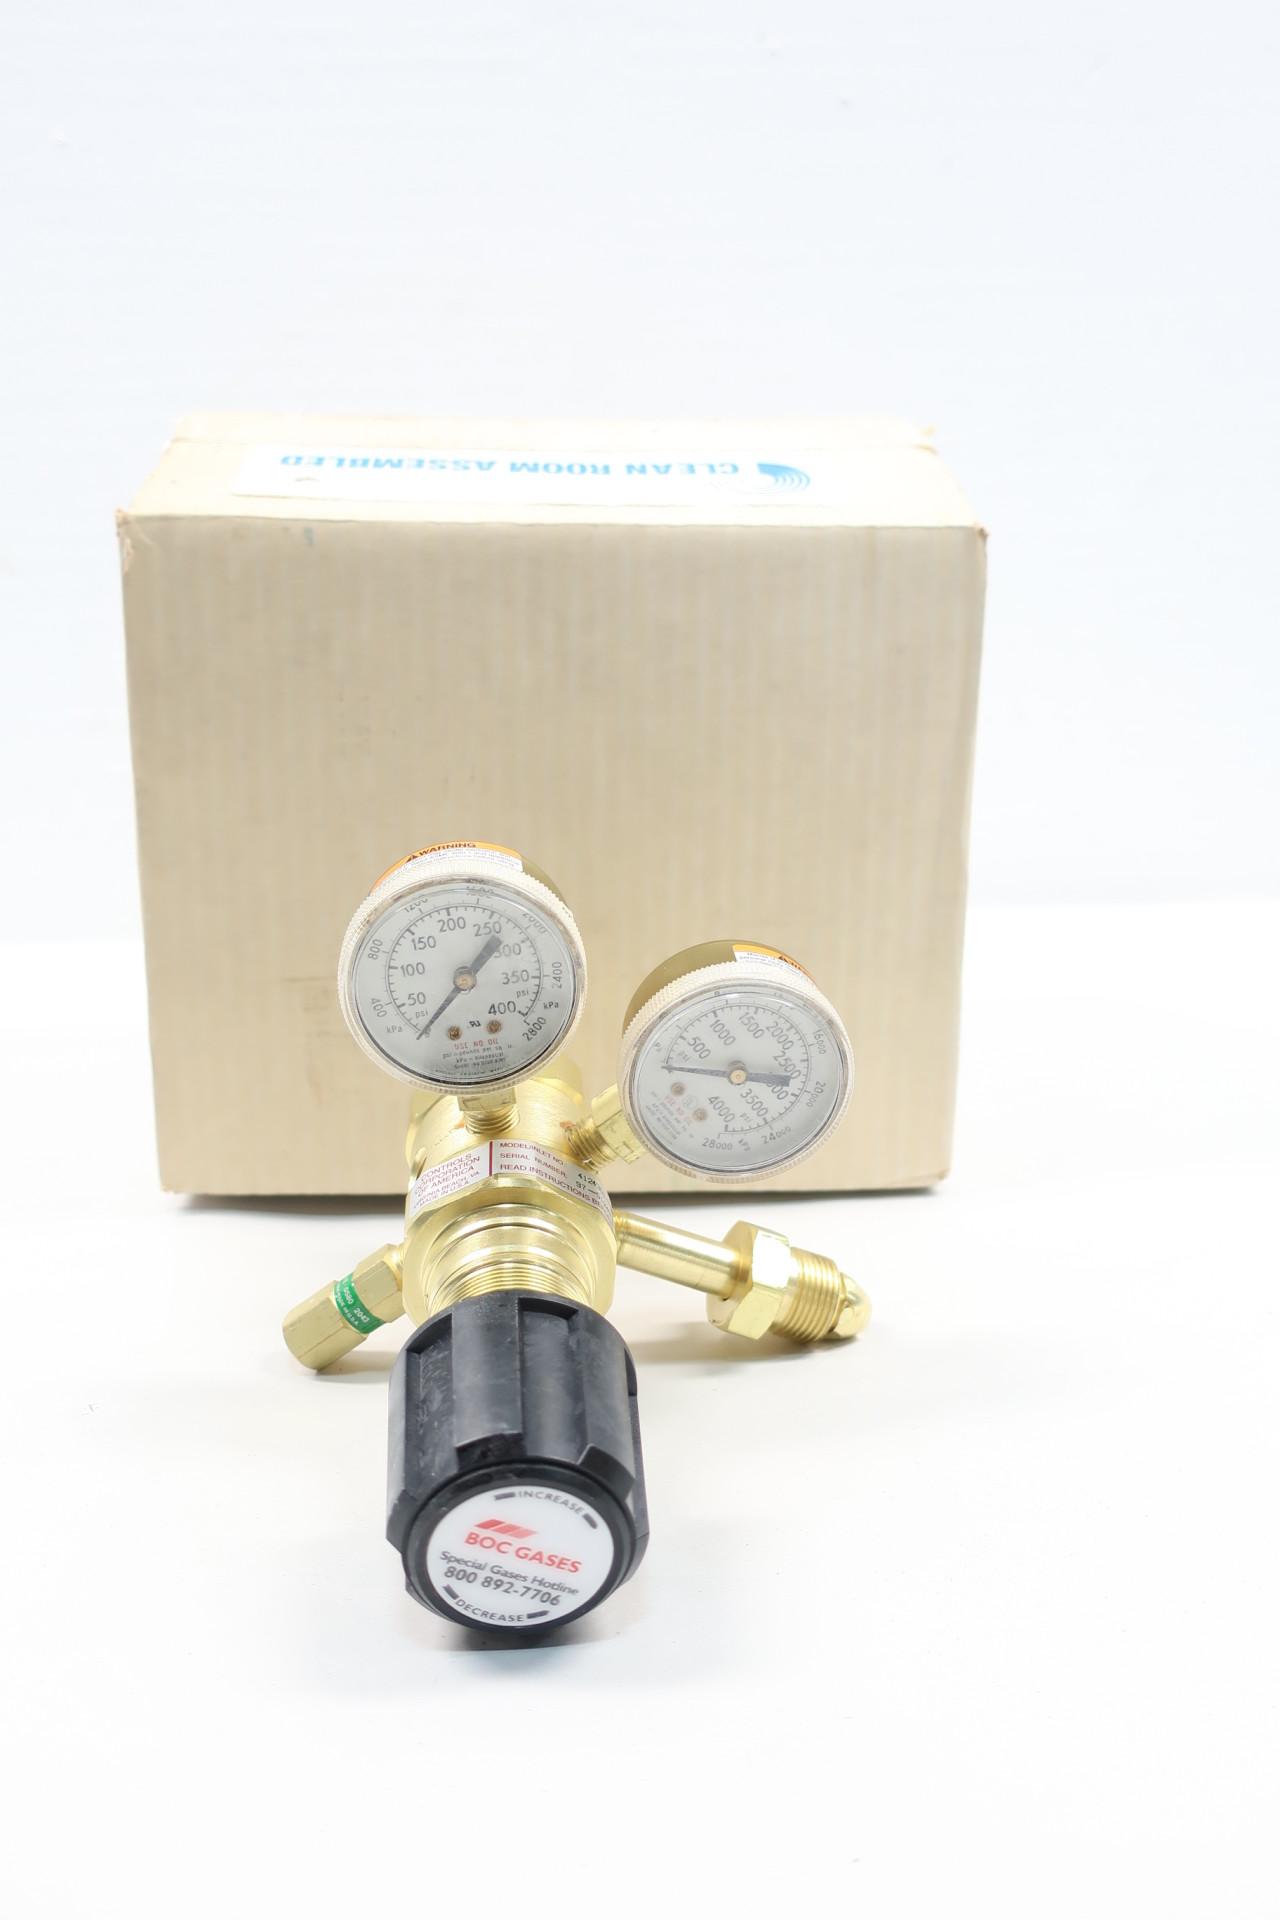 Details about   Concoa 4124301-580 Dual Stage Brass Gas Regulator 